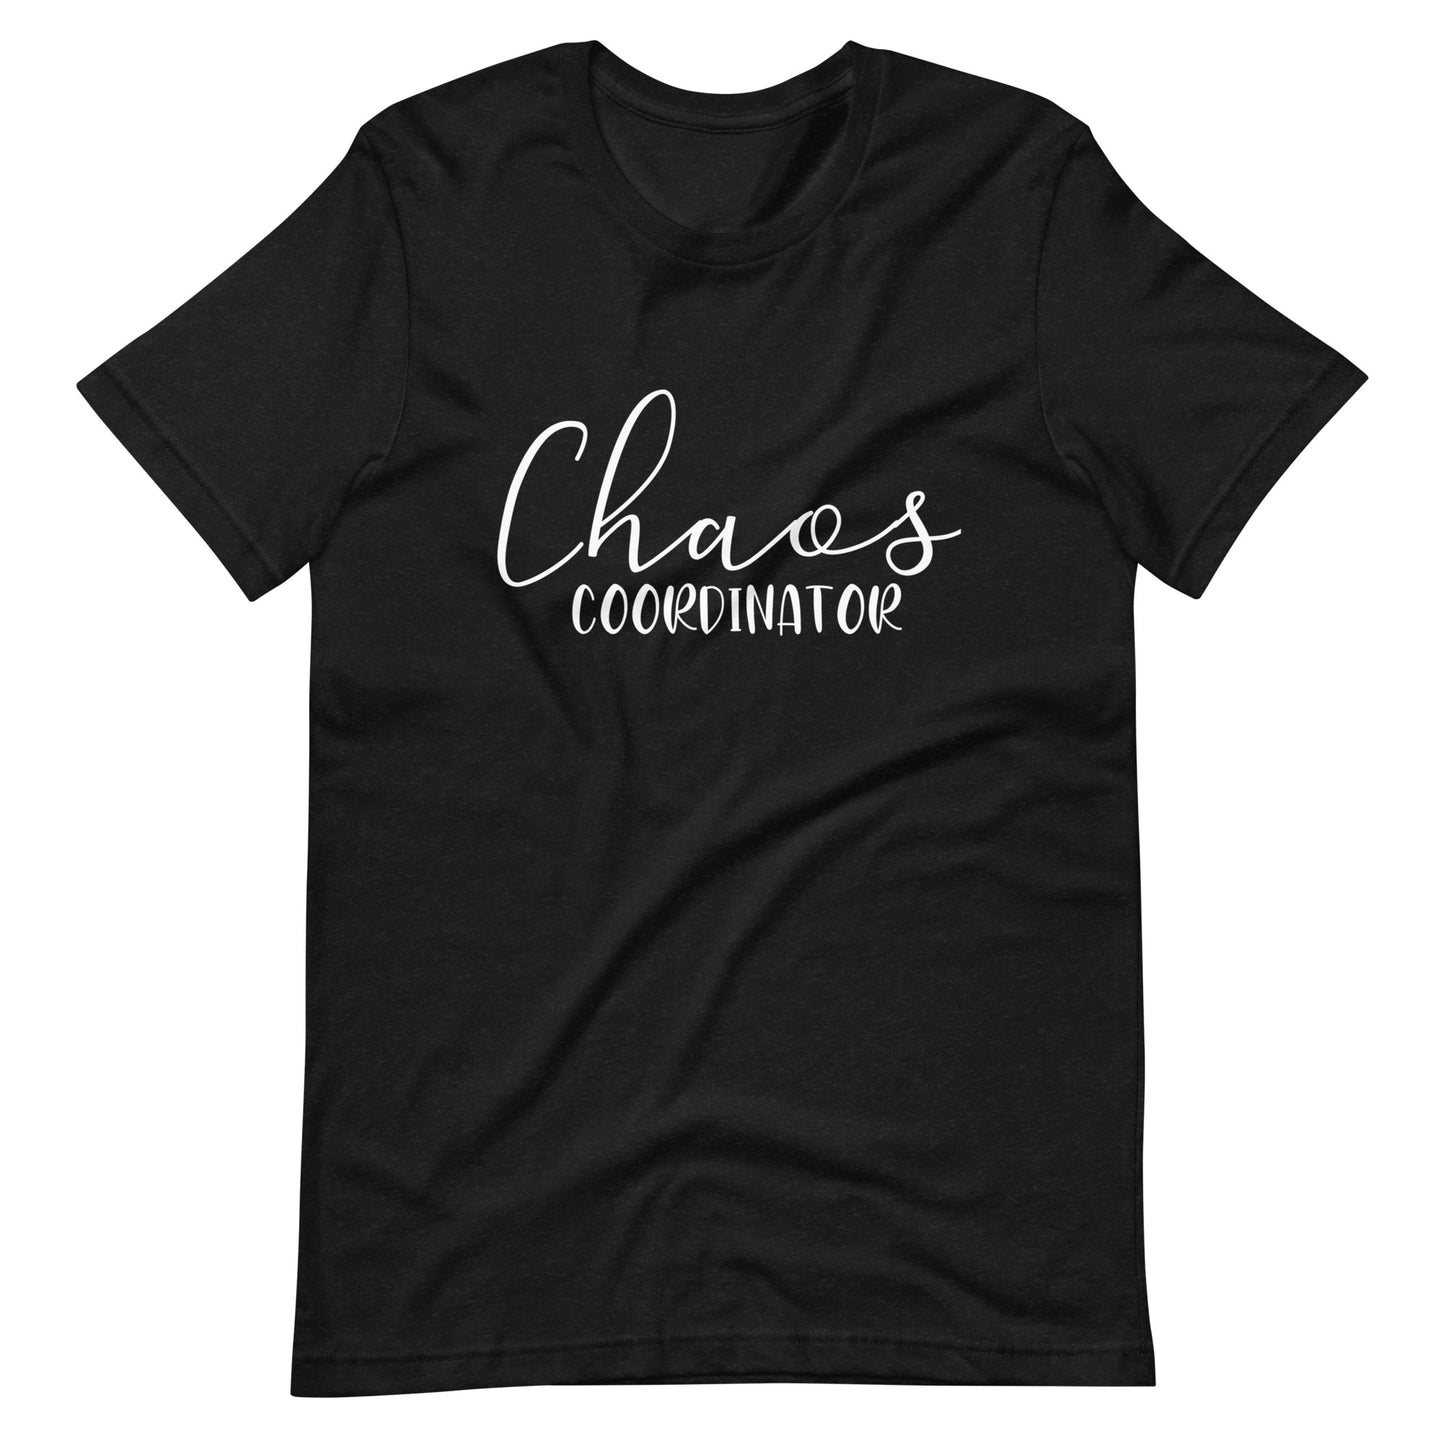 Chaos Coordinator T-shirt in black with white lettering